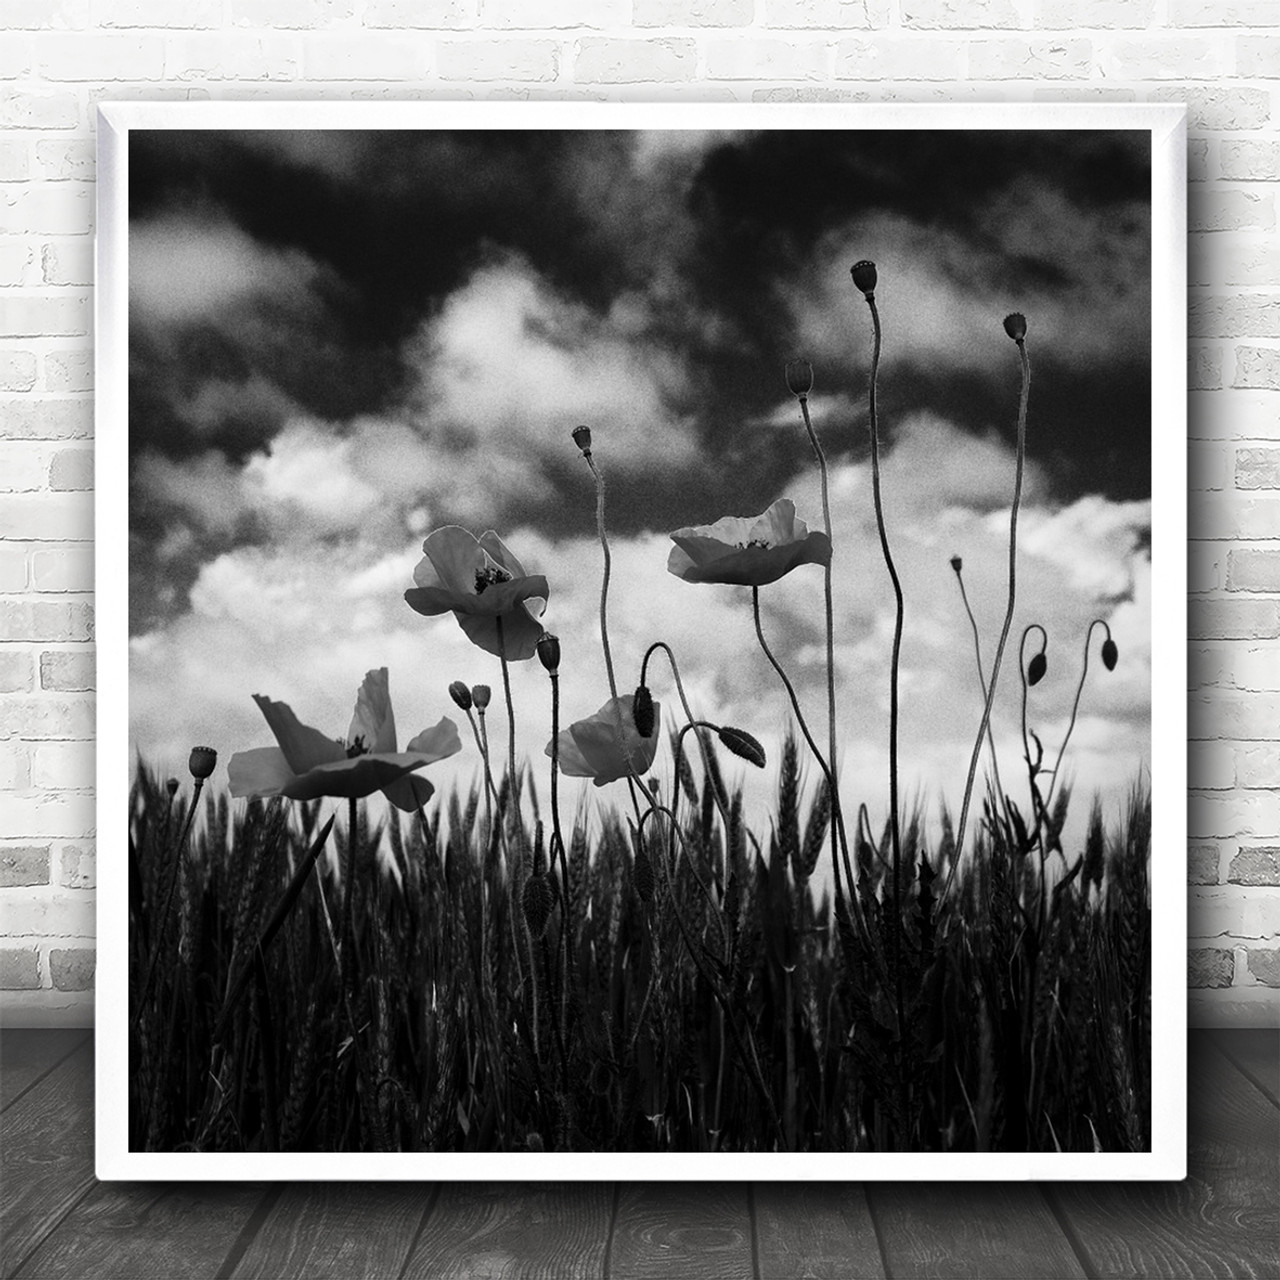 Black and White Wild Flower Contour Pattern Framed Wall Art Print